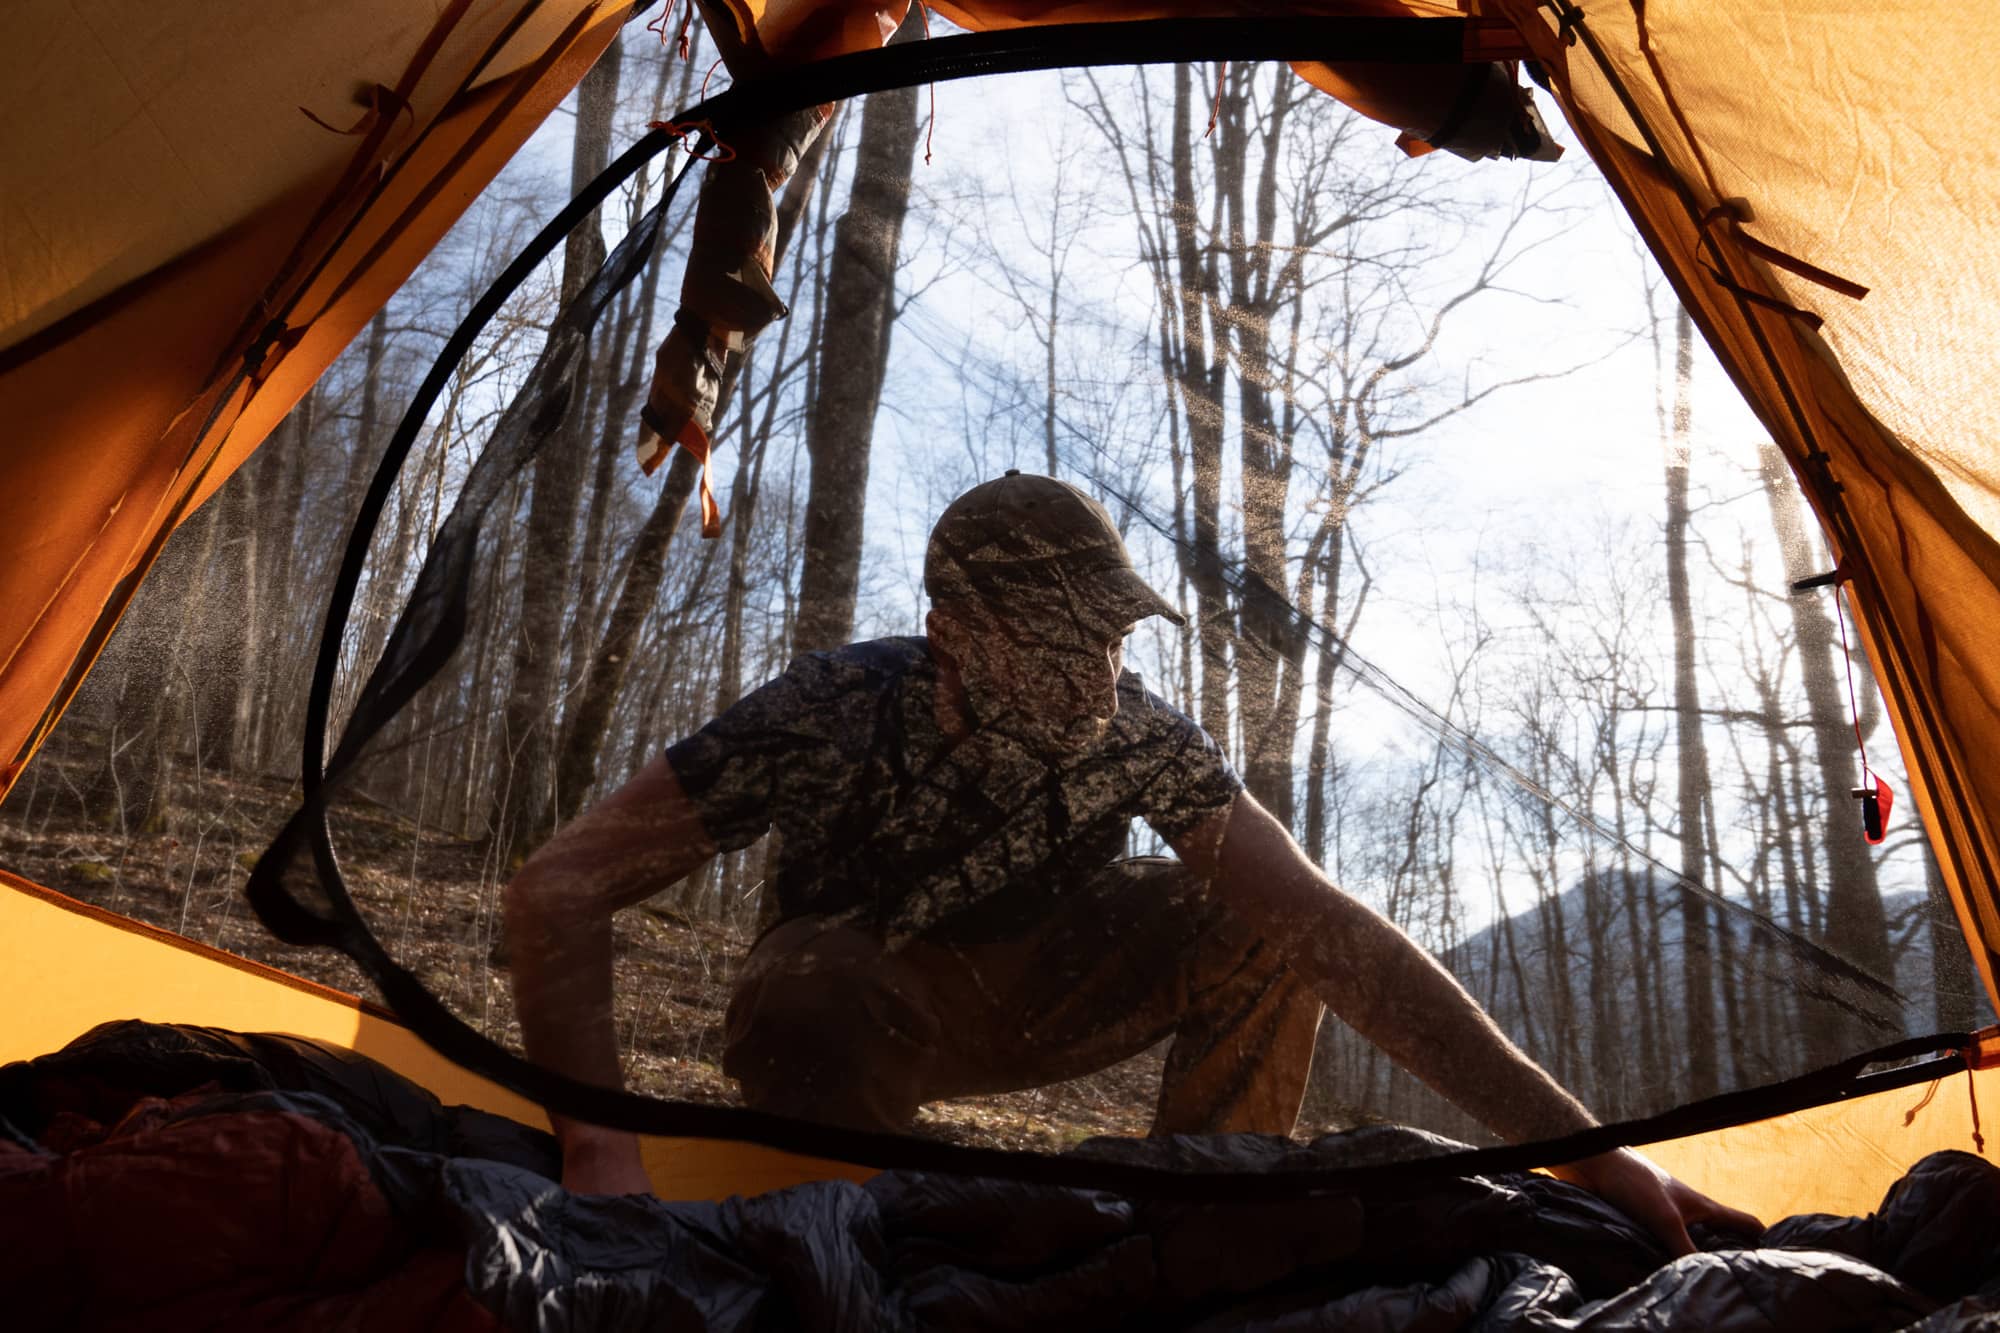 Eamonn Bell lays his sleeping bag in our tent during his first night backpacking a section of the Appalachian Trail in the Nantahala National Forest on Saturday, March 5, 2022, at the Rock Gap campground near Franklin, North Carolina.